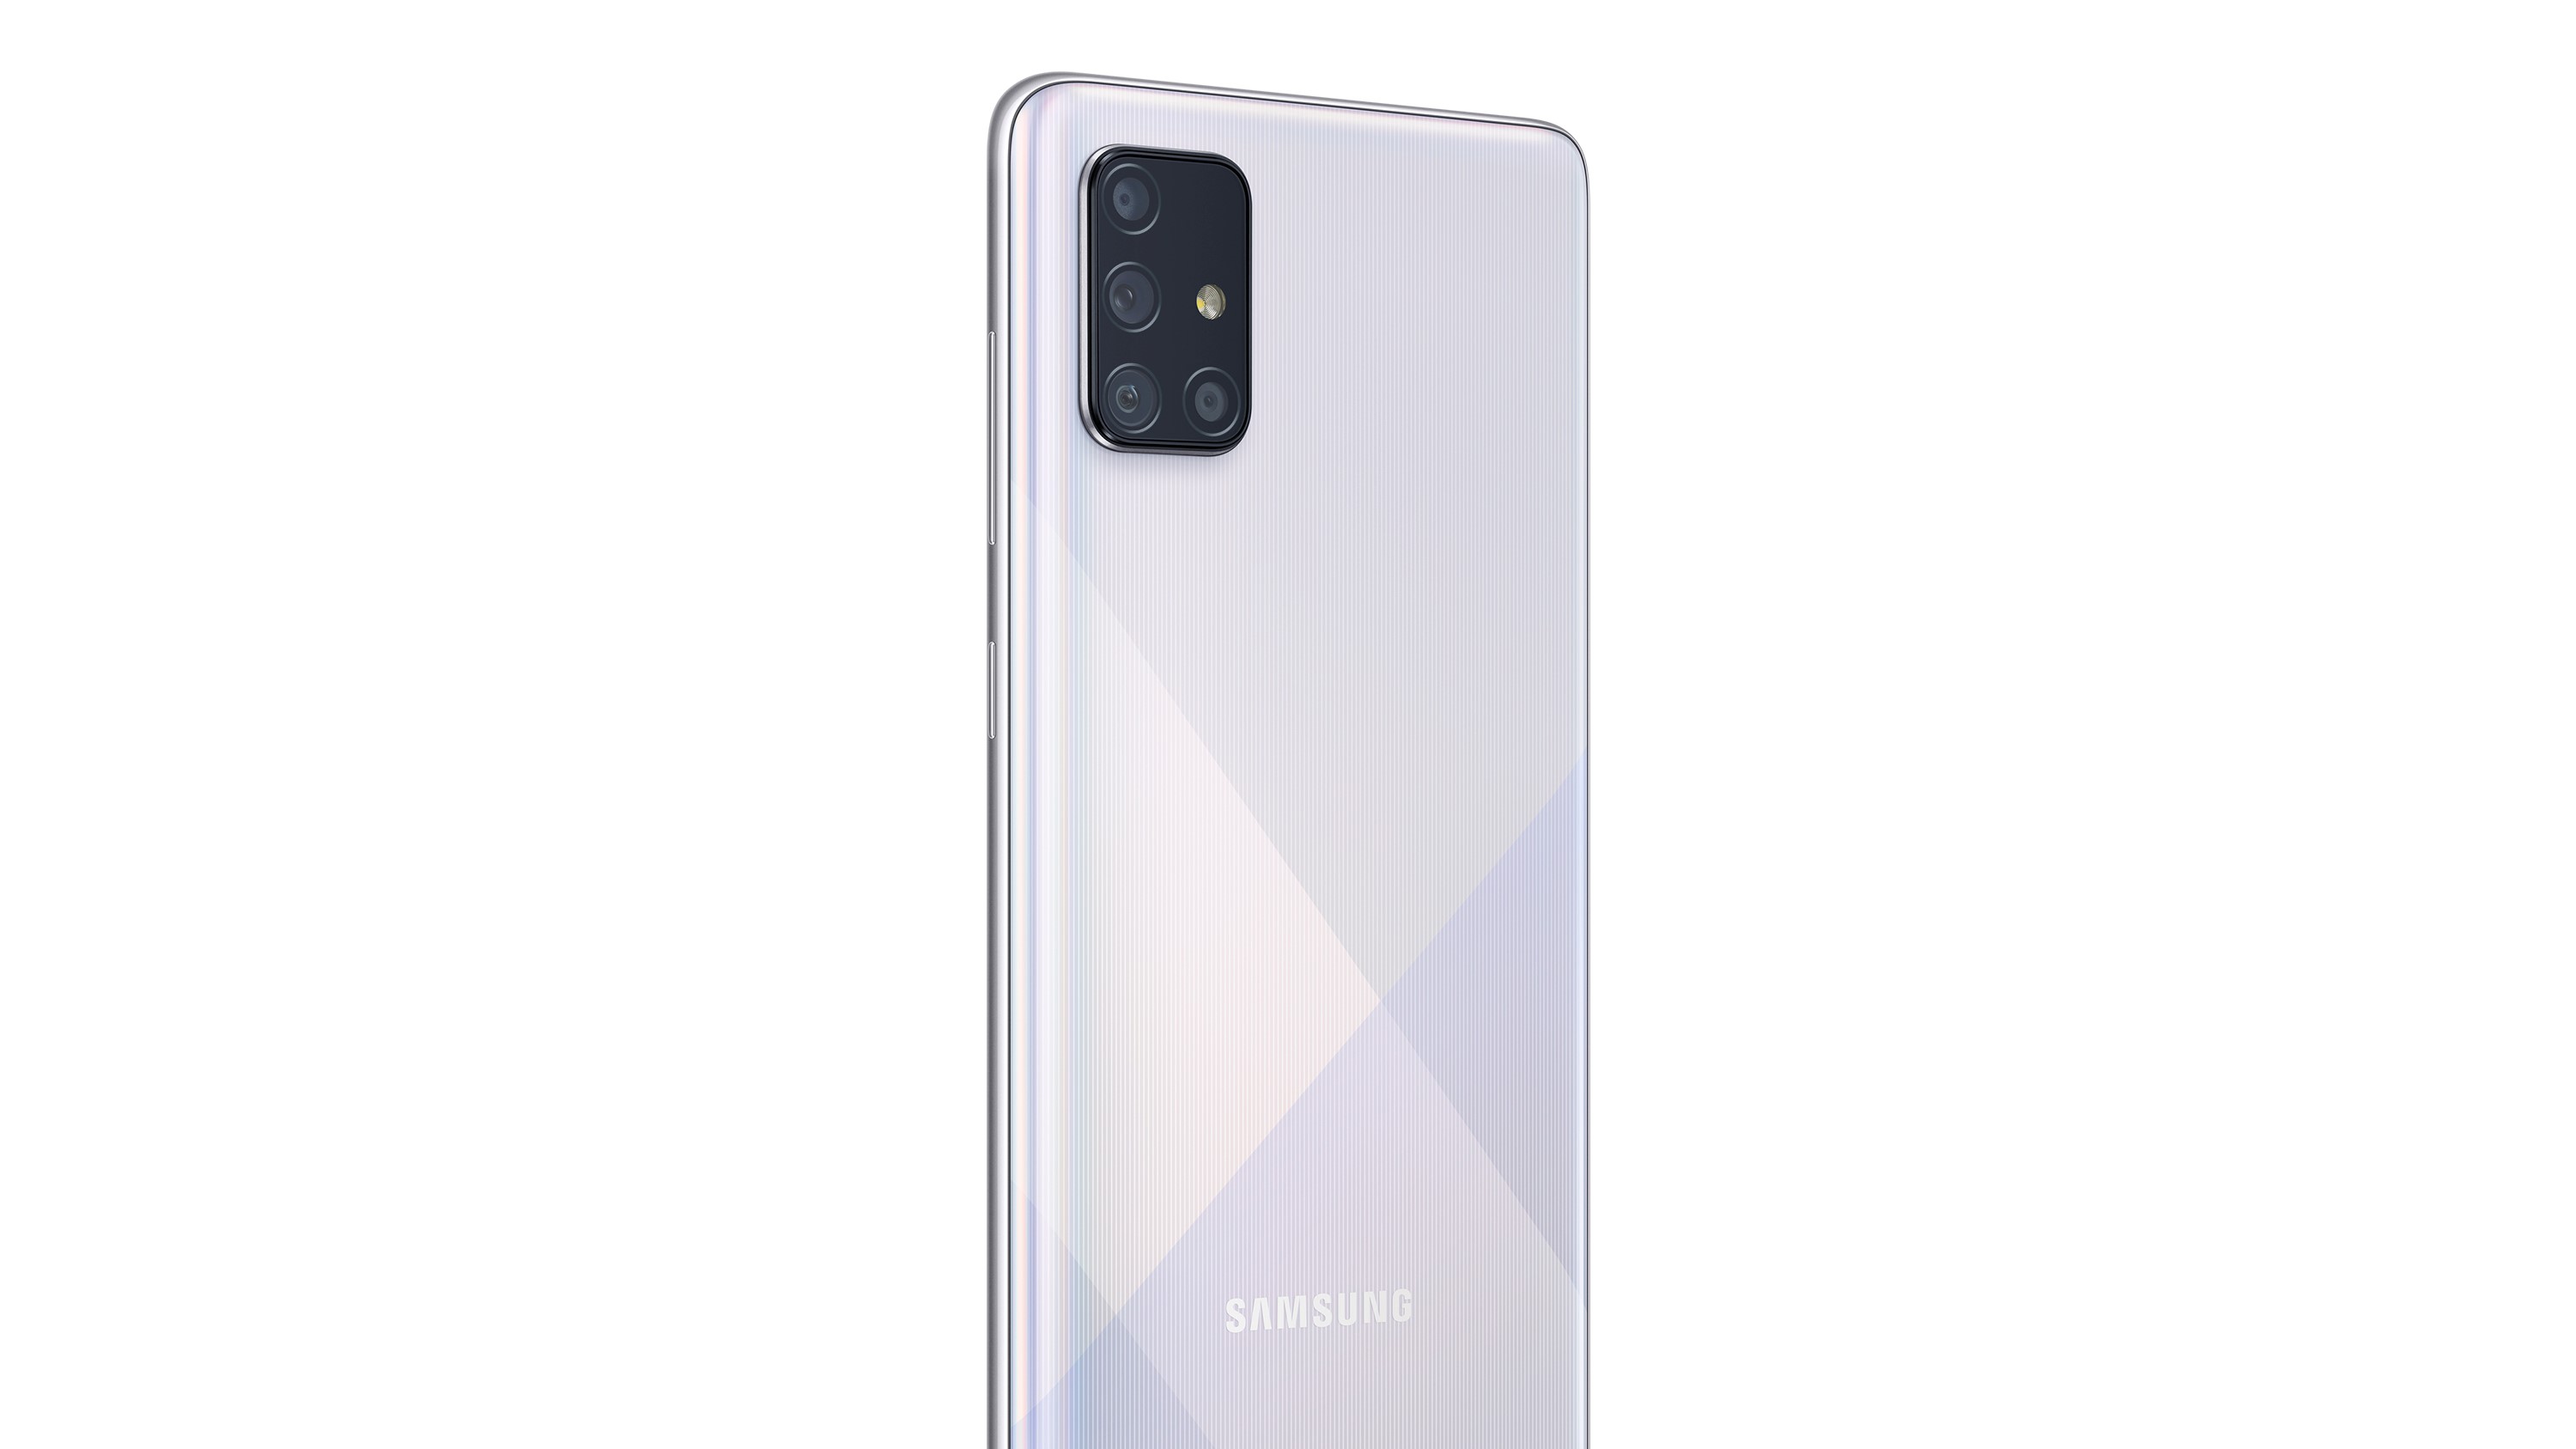 Samsung Galaxy A71 With Snapdragon 730 And 64mp Quad Cameras